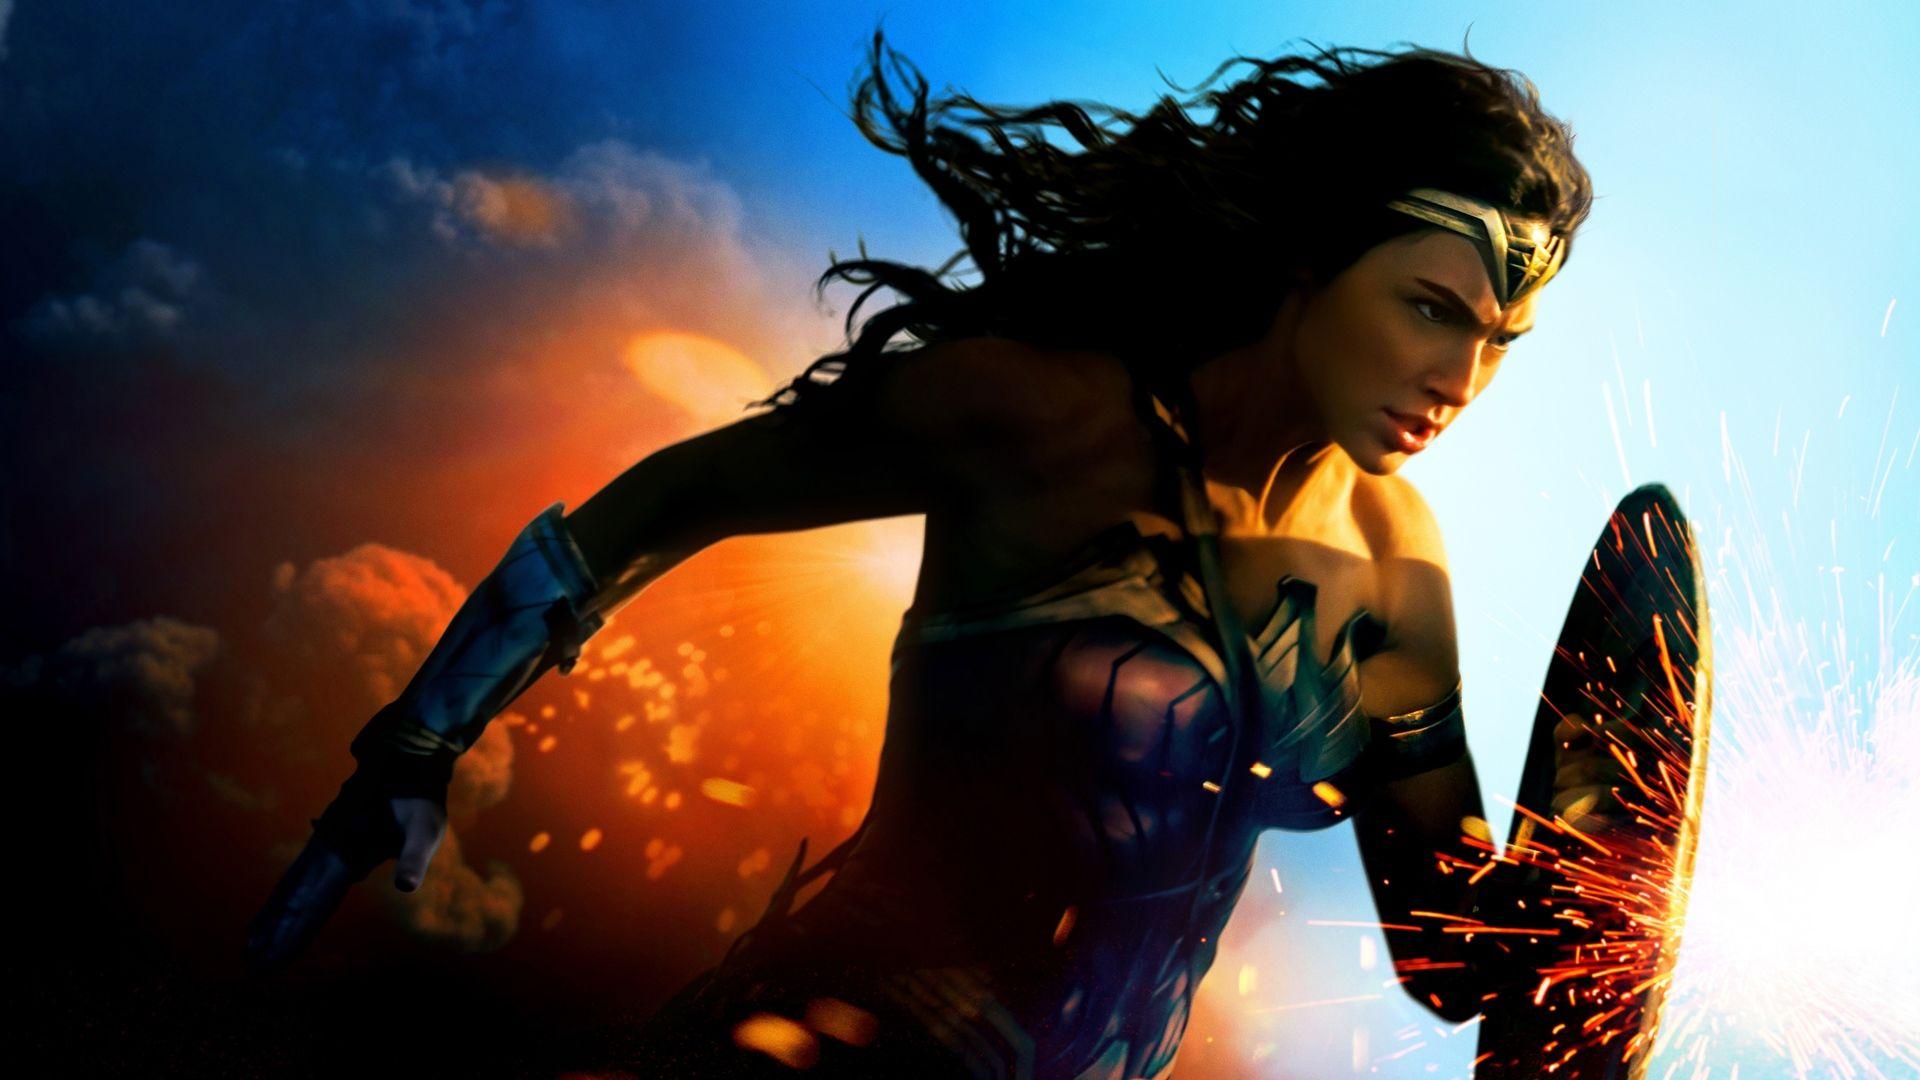 free Wonder Woman for iphone download